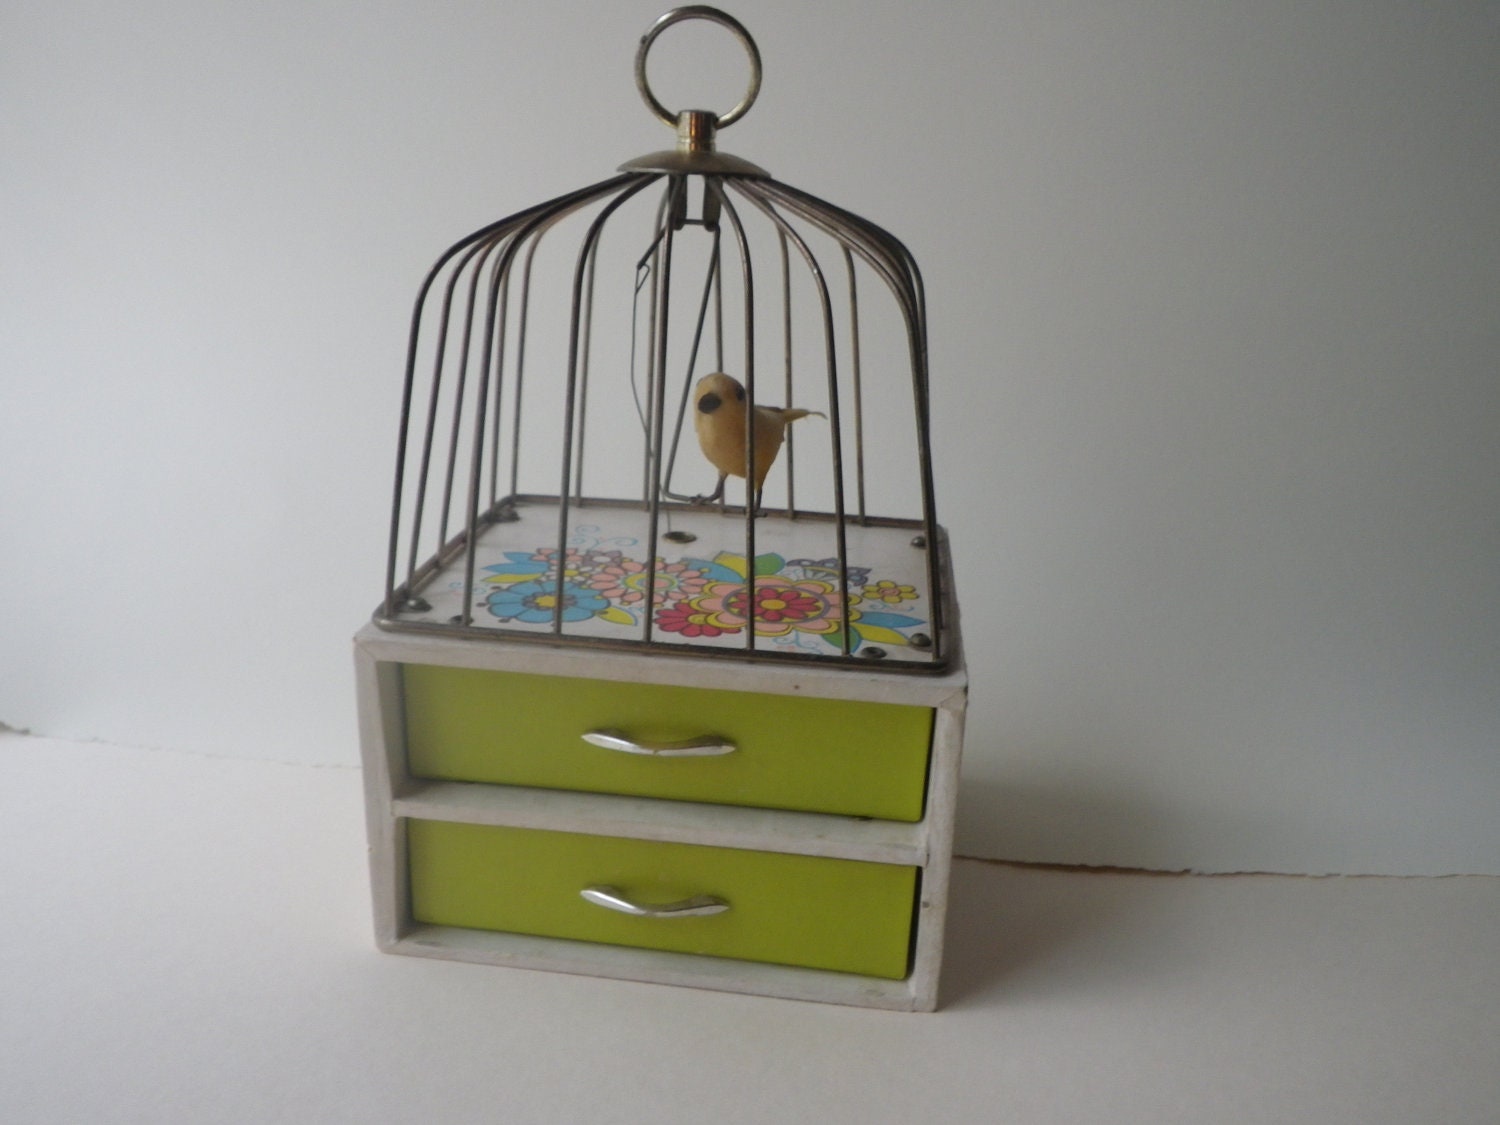 Vintage  Musical Box with Bird Cage- Plays Music while the bird swings - HiddenStarlings